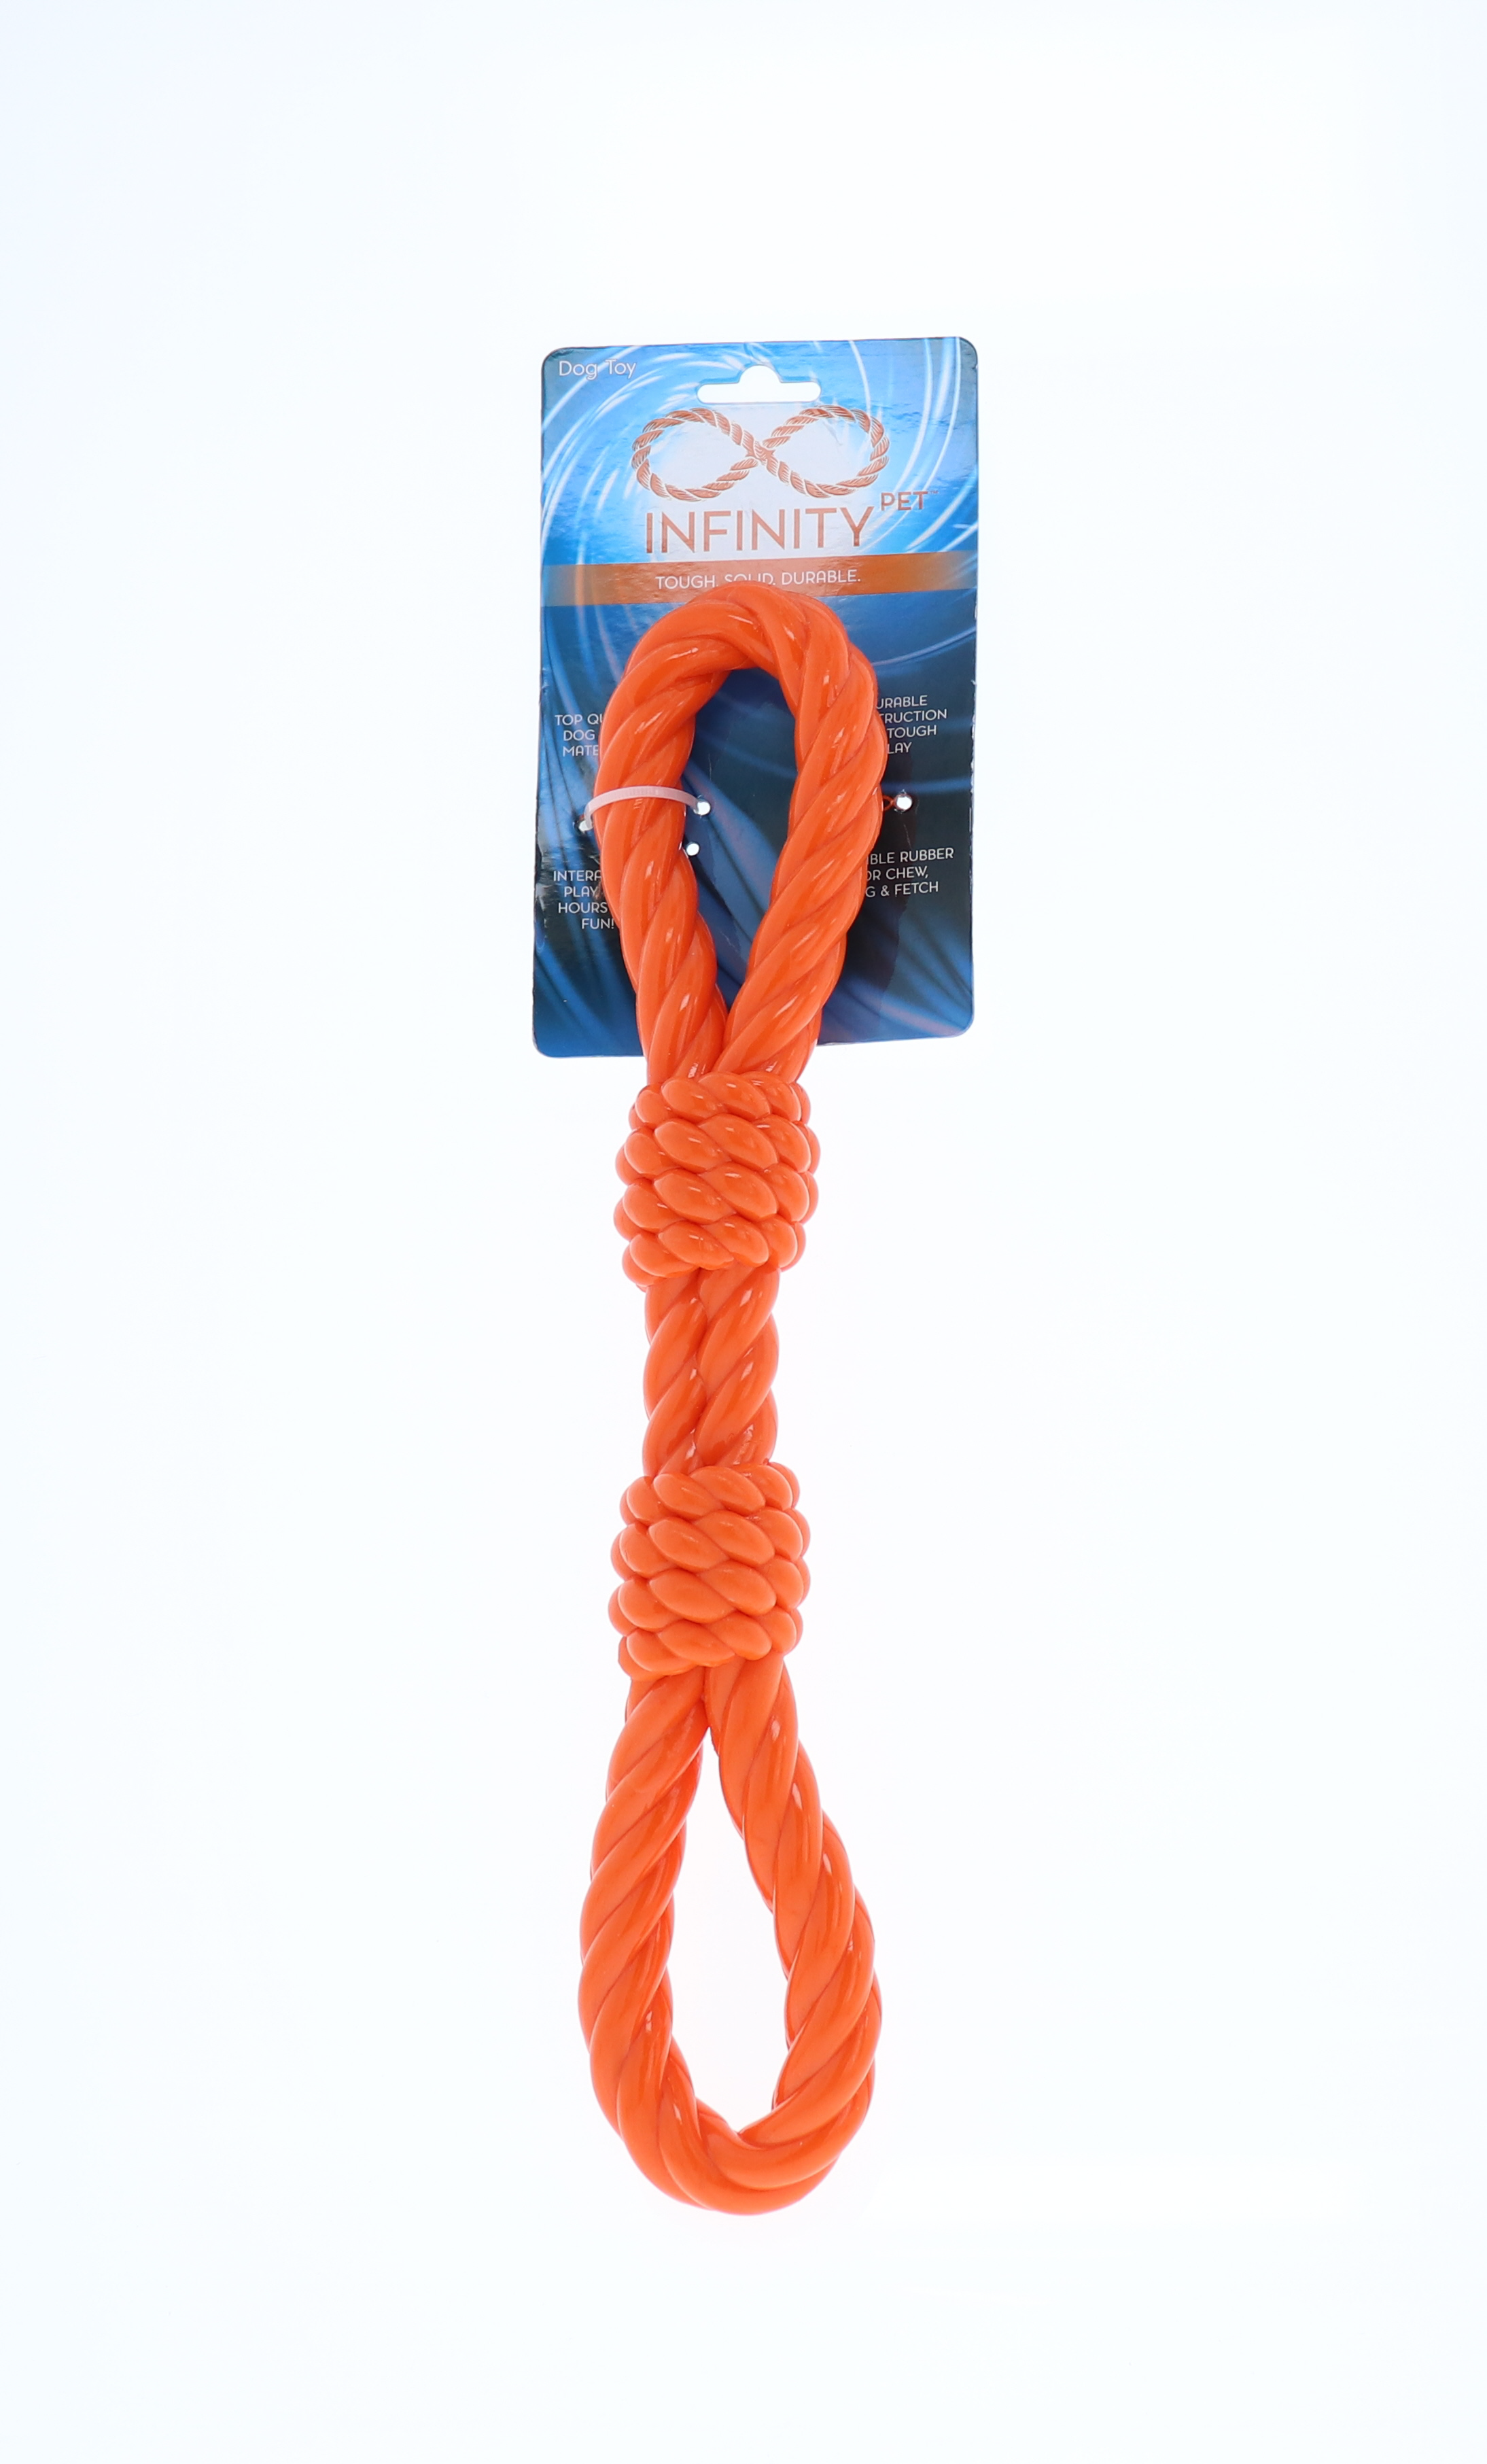 Infinity Pet Flexible TPR Rope Chew and Tug Toy, Double Knot, Orange - image 1 of 5